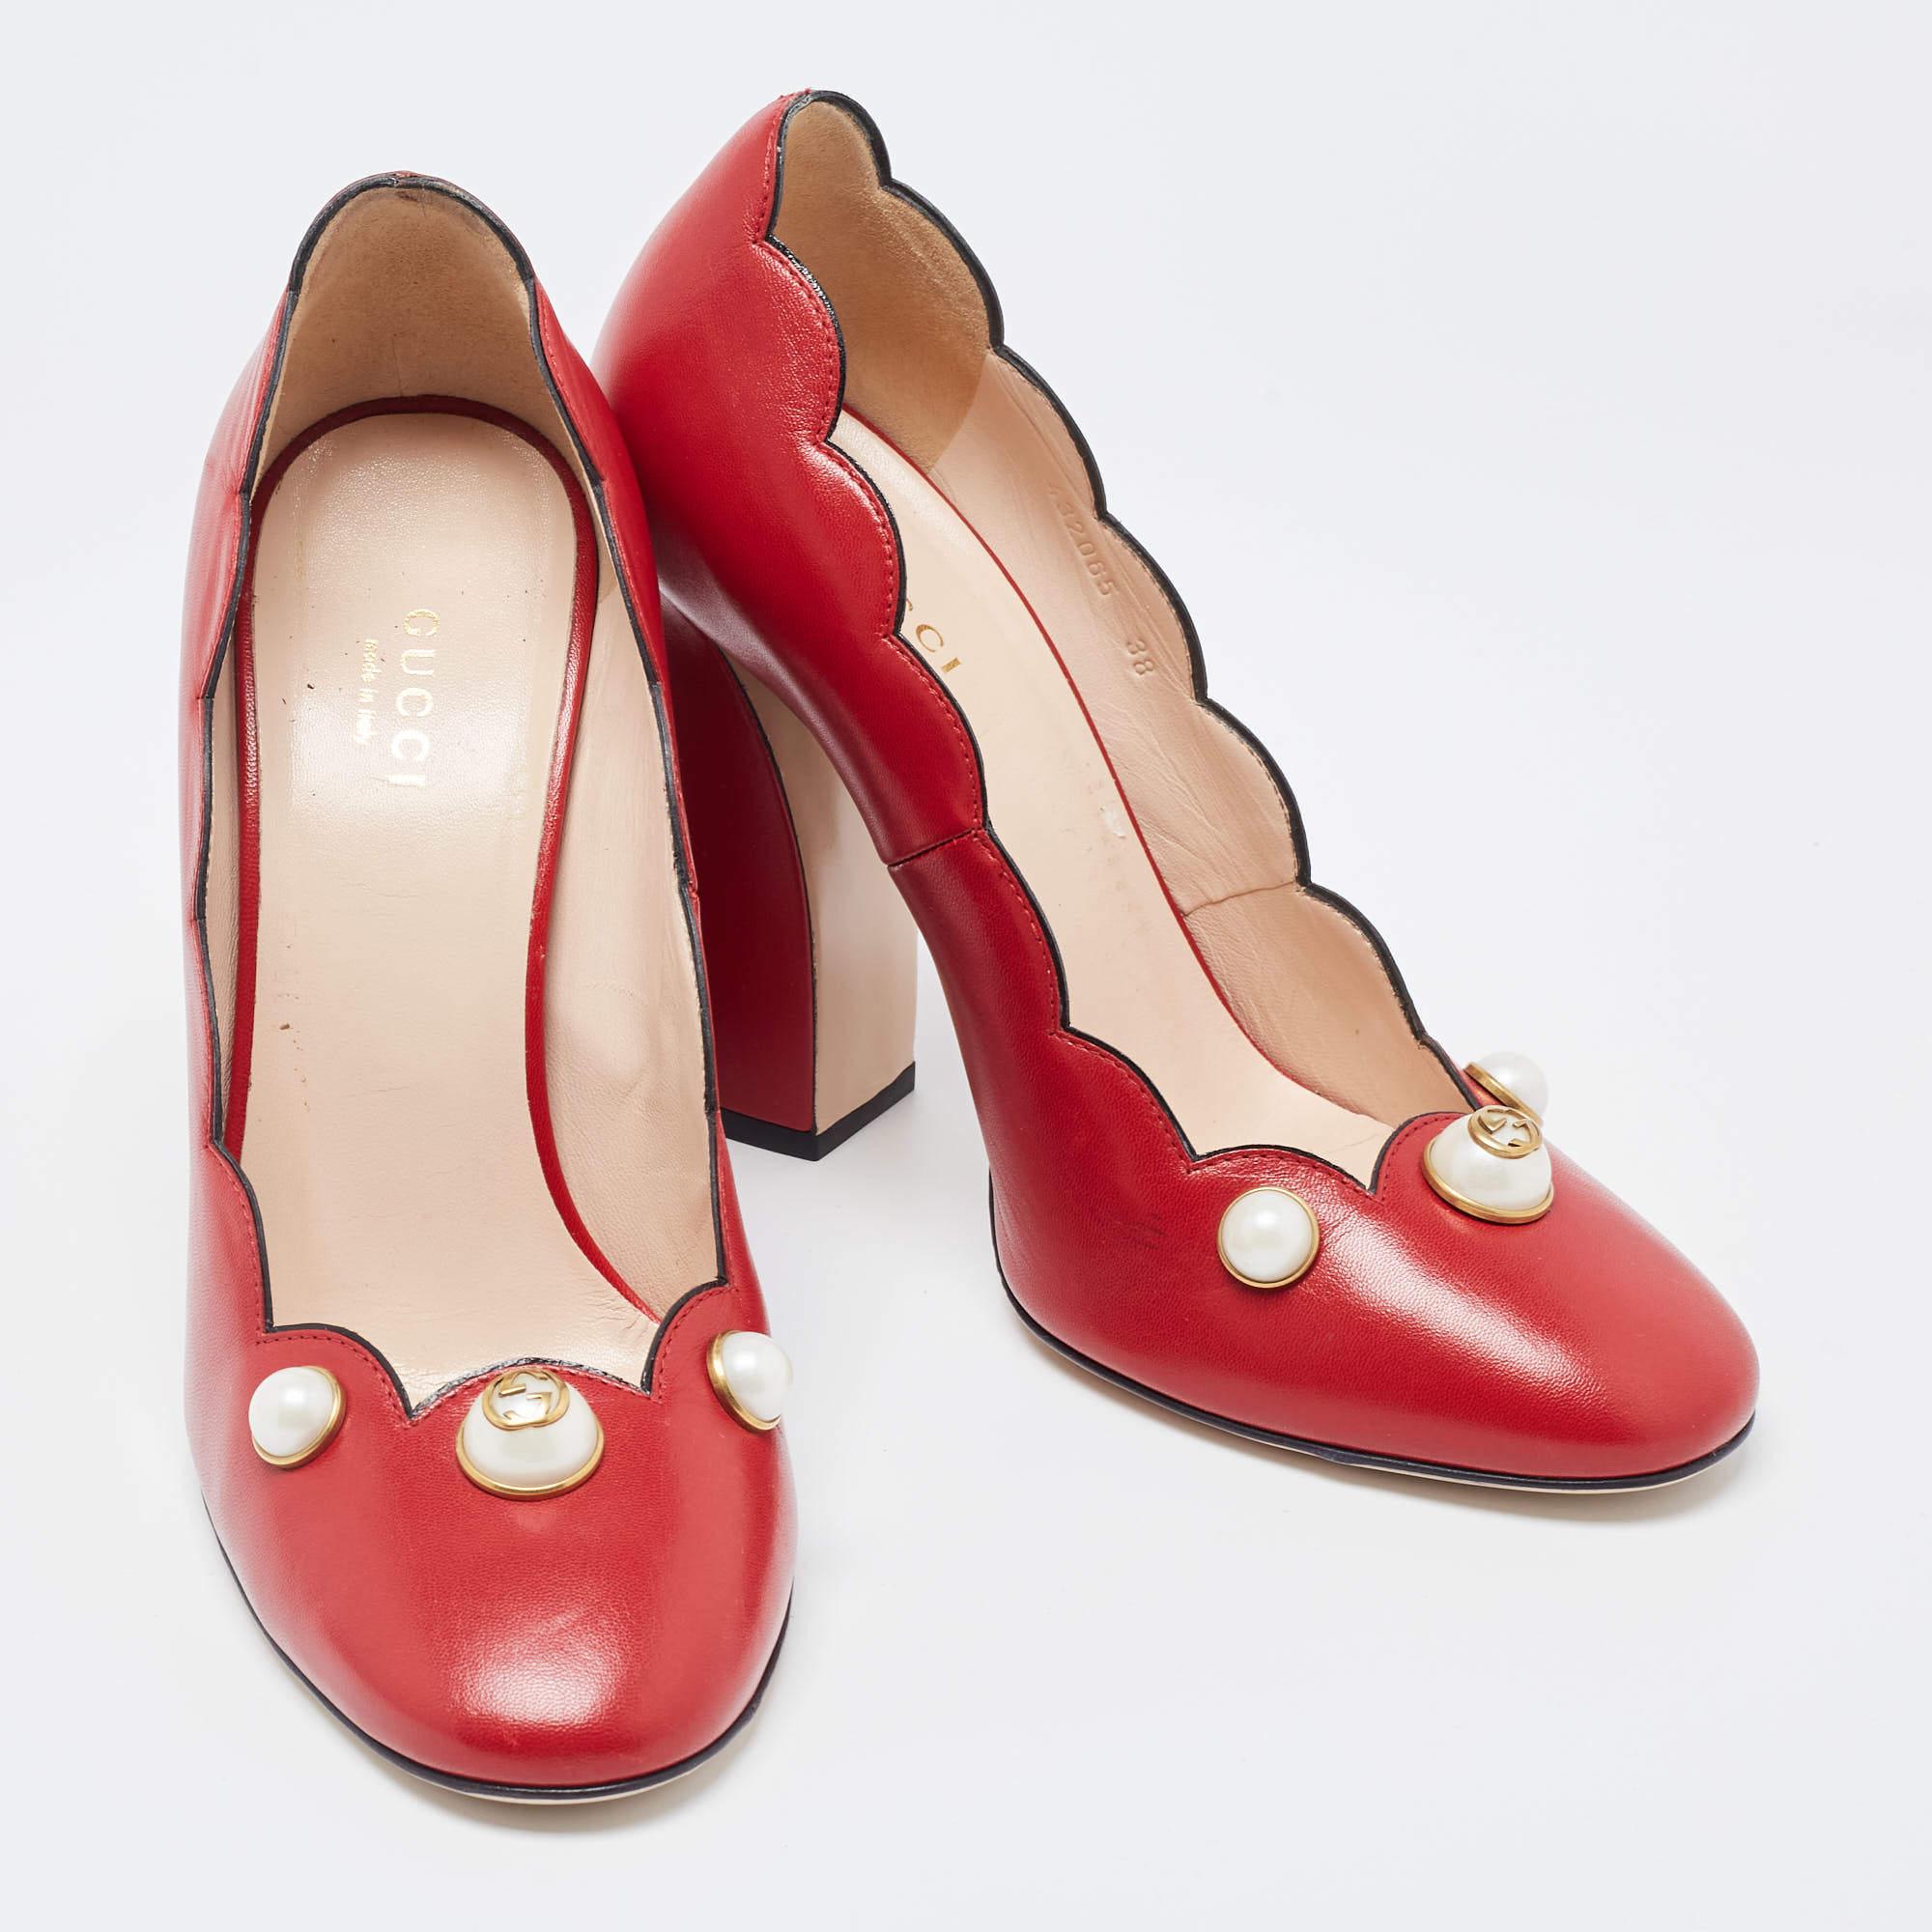 Strike the right pose with these marvelous pumps from Gucci. They've been crafted from leather and styled with scallop details and faux pearl embellishments. The pair is balanced on block heels and they'll look amazing with your tulle dresses and